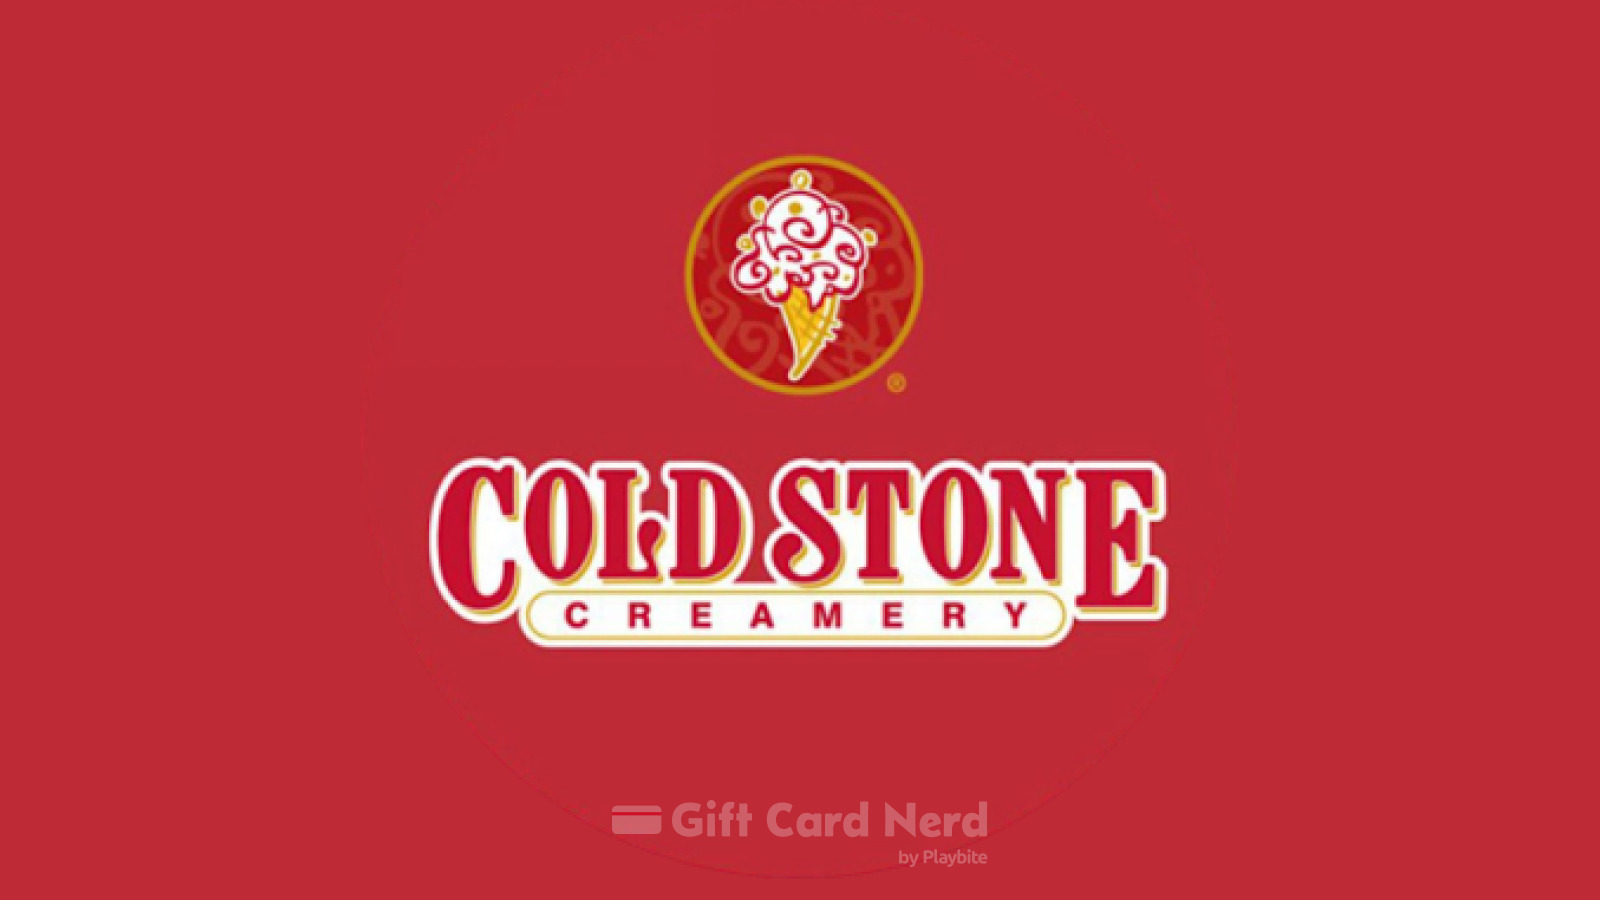 Can You Use a Cold Stone Creamery Gift Card on Venmo?